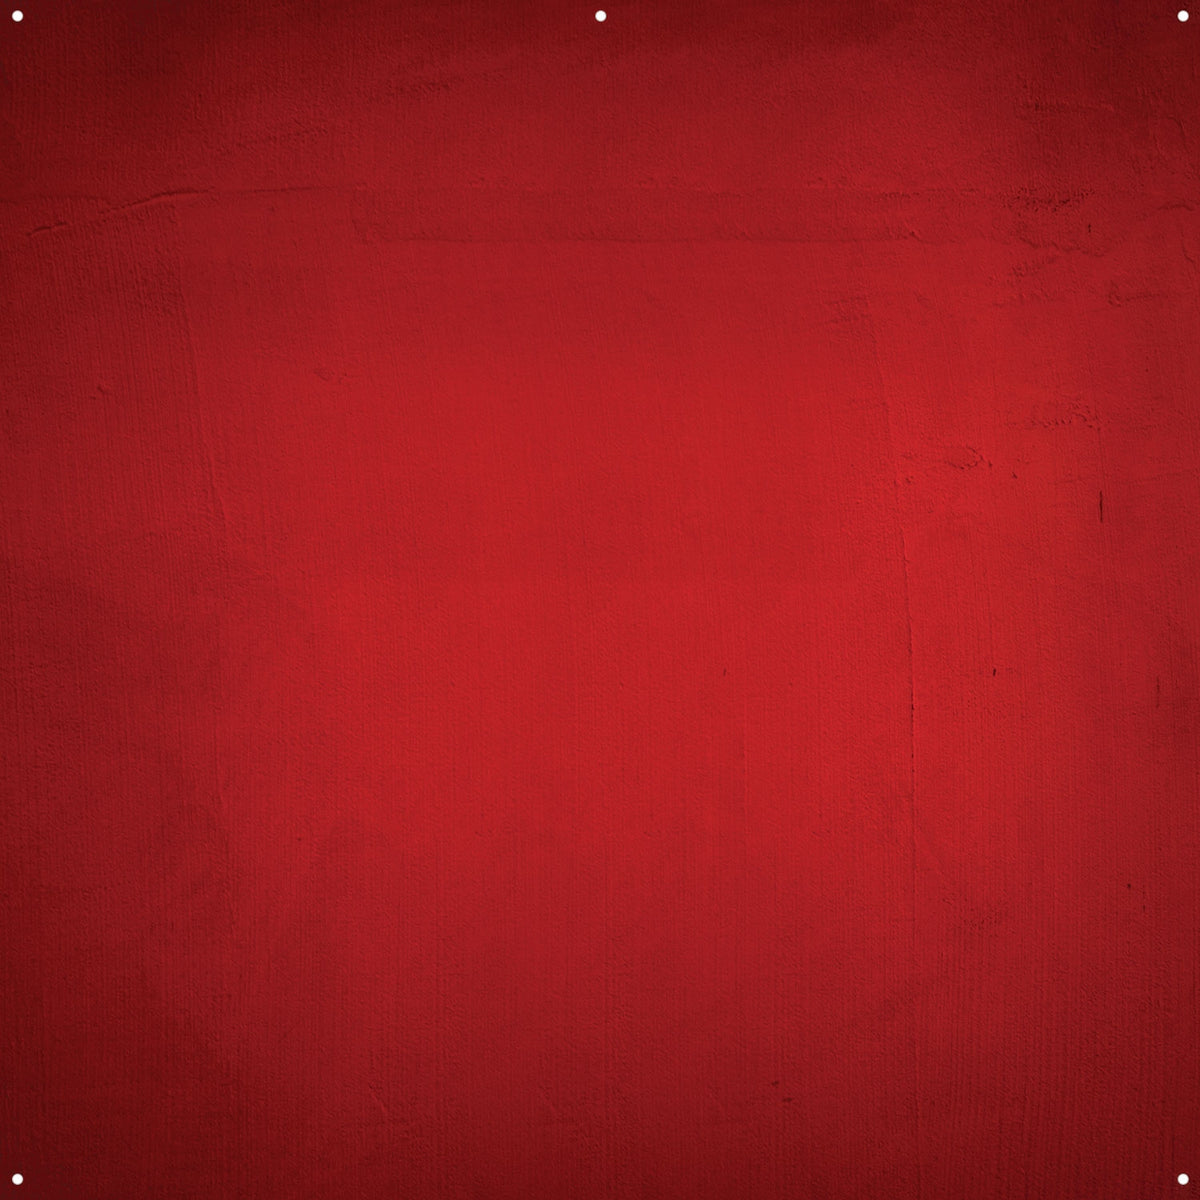 X-Drop Pro Fabric Backdrop - Aged Red Wall (8' x 8')